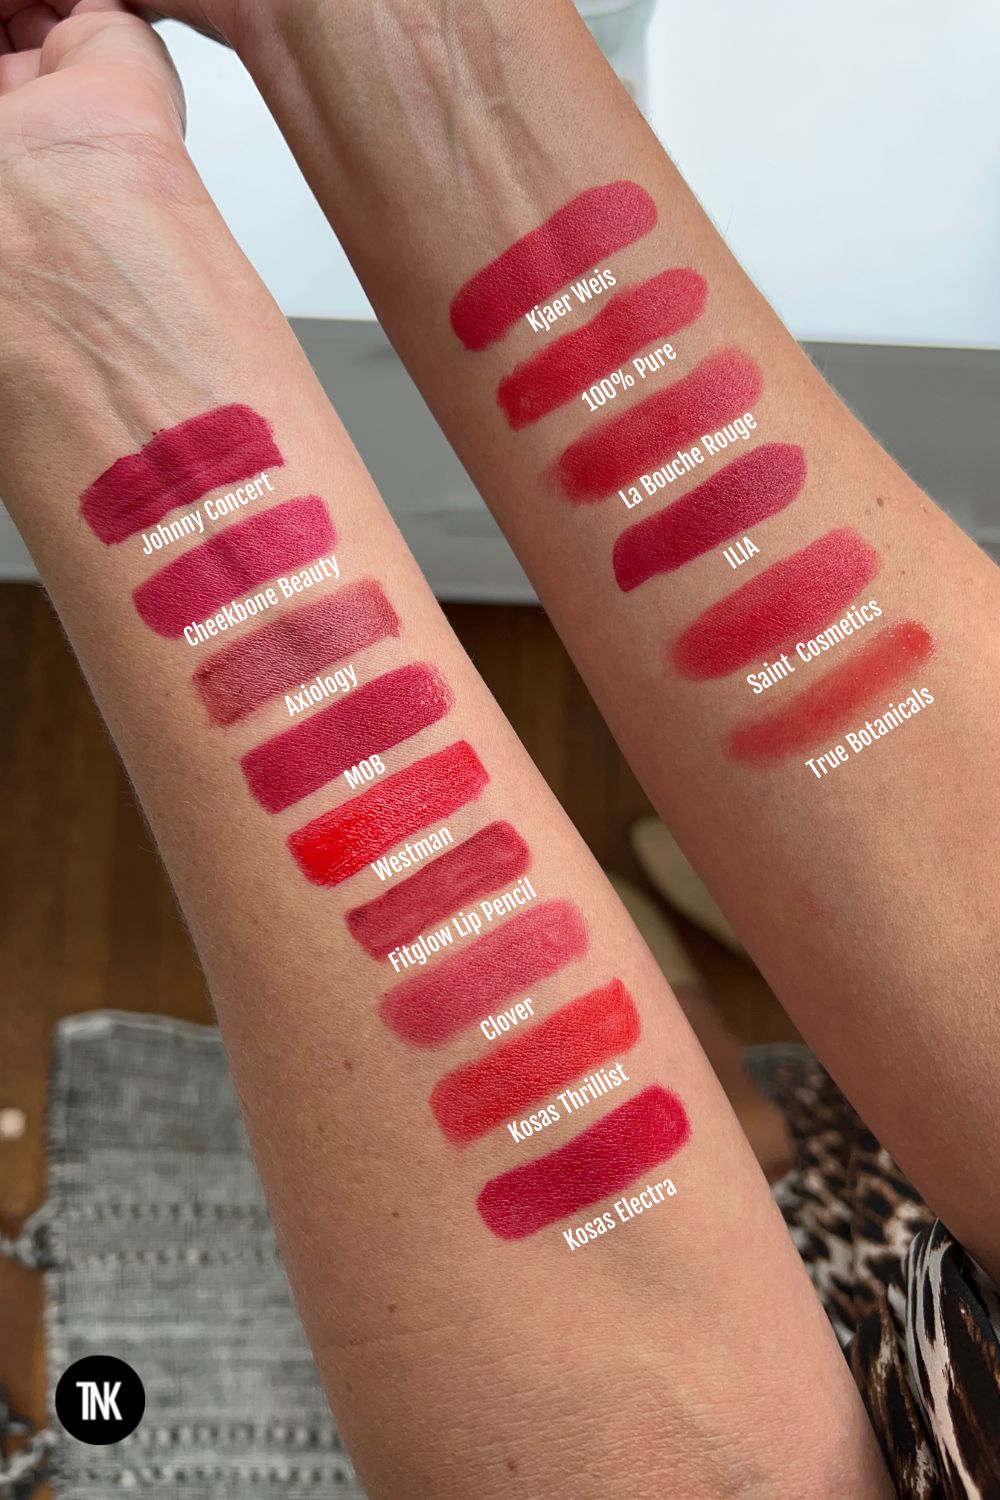 Swatches of red lipsticks on a woman's arm with labels of their brand name.